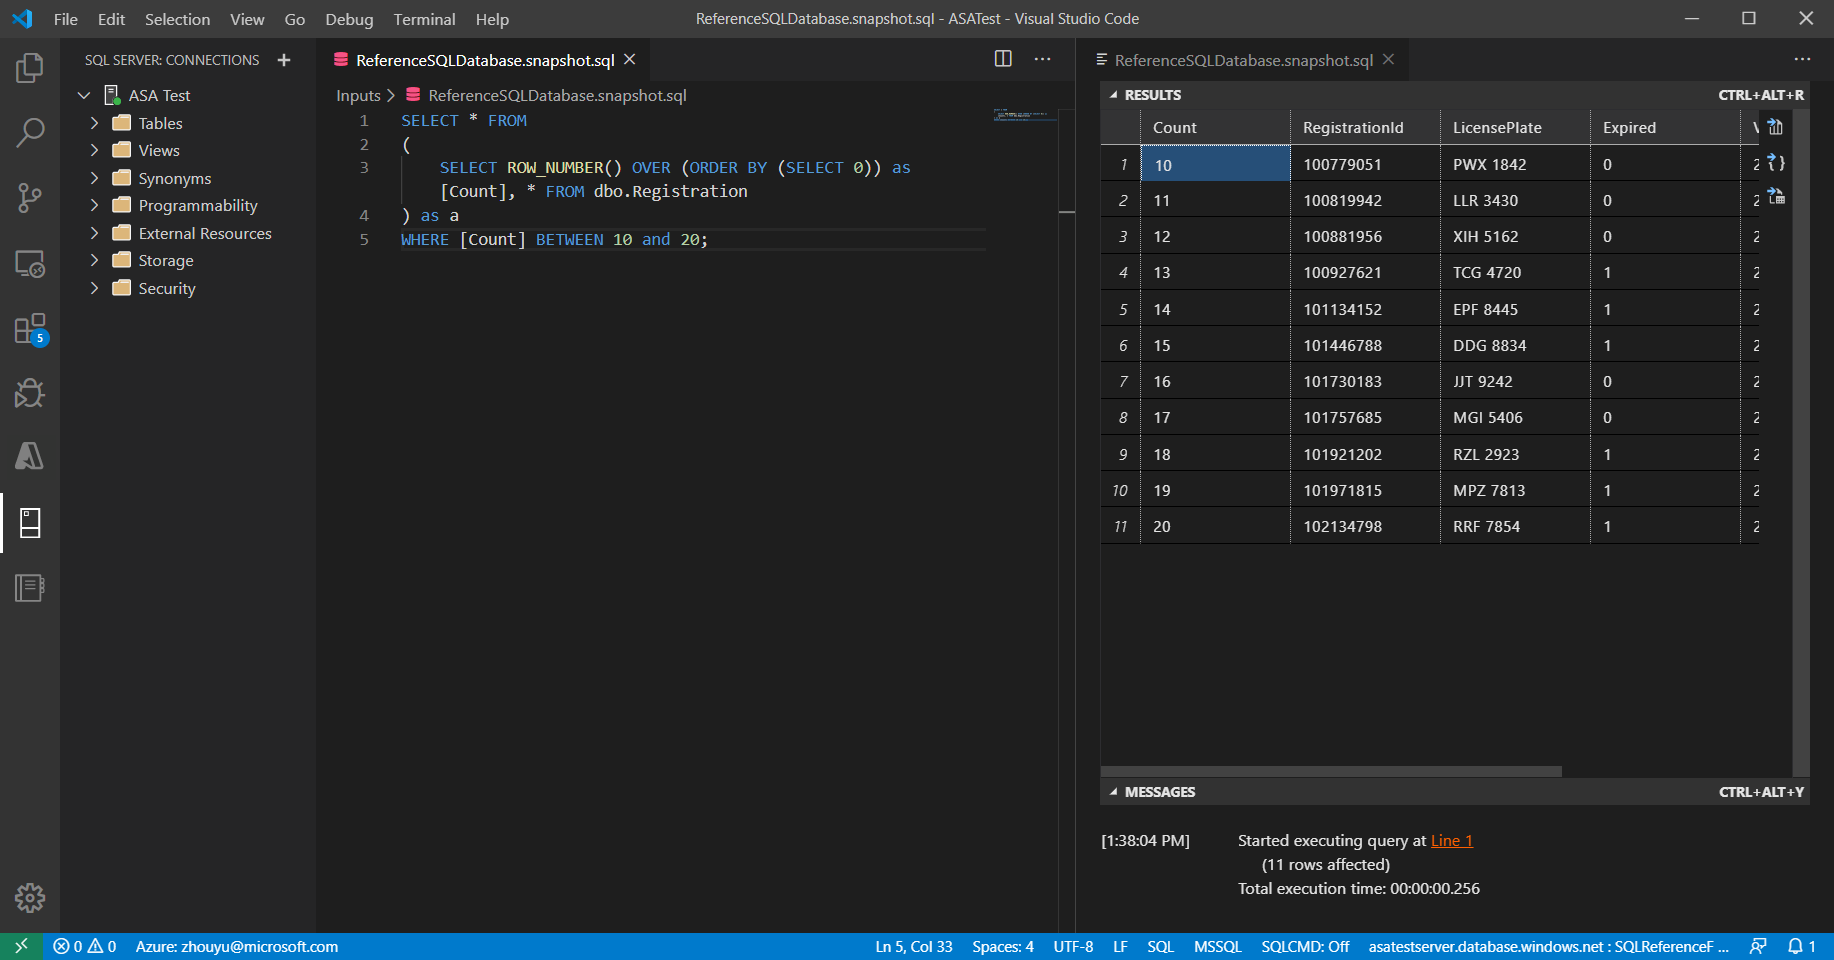 The query search results are in a VS Code editor tab.